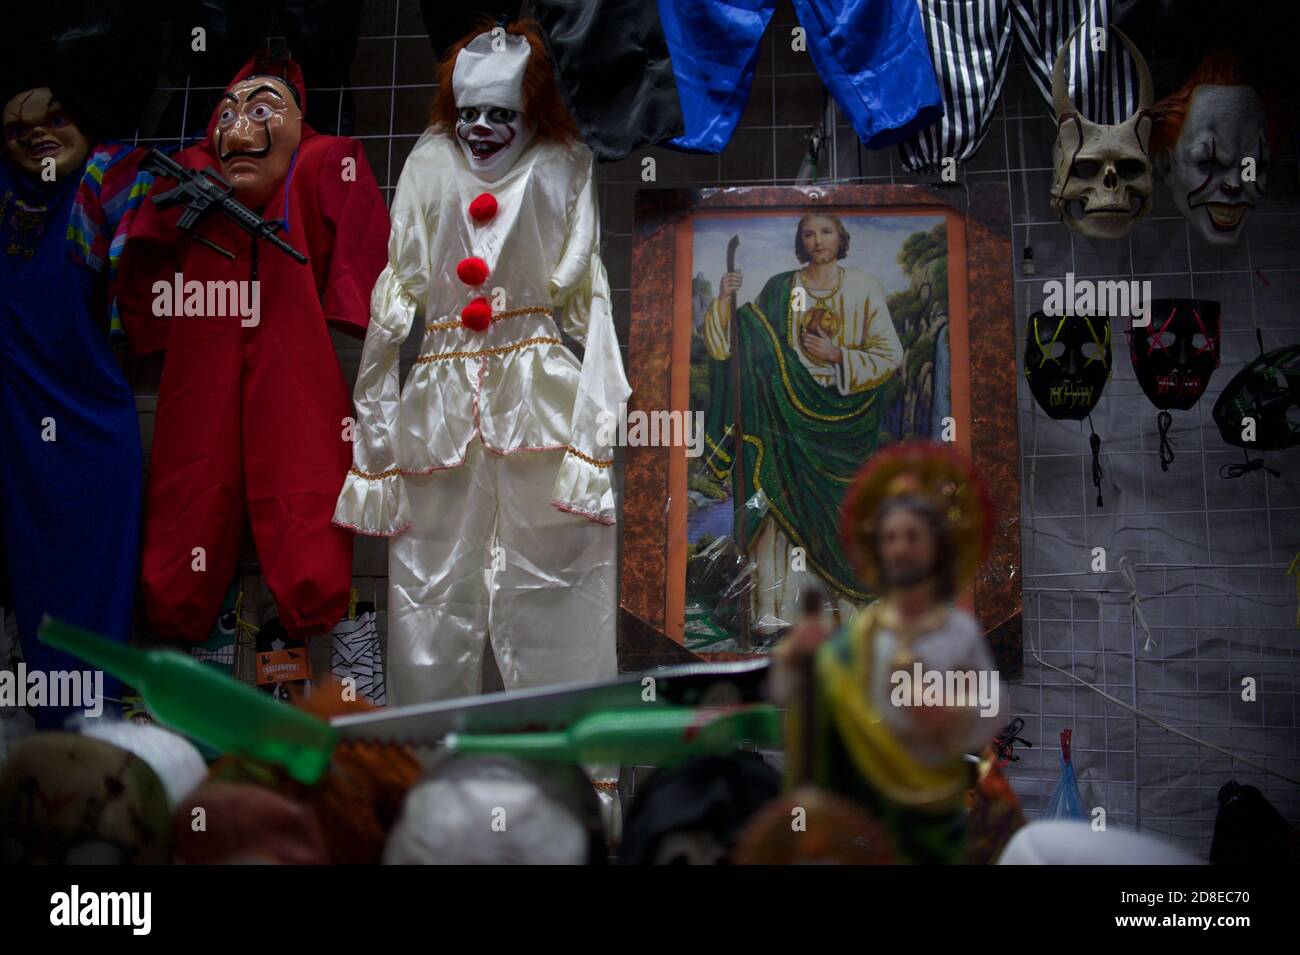 Tlaxcala, Mexico. 29th Oct, 2020. Costumes hang in a shop before the Day of the Dead and Halloween. The Day of the Dead is a big celebration in Mexico. This year, corona-related restrictions are to apply nationwide. Credit: Jesus Alvarado/dpa/Alamy Live News Stock Photo